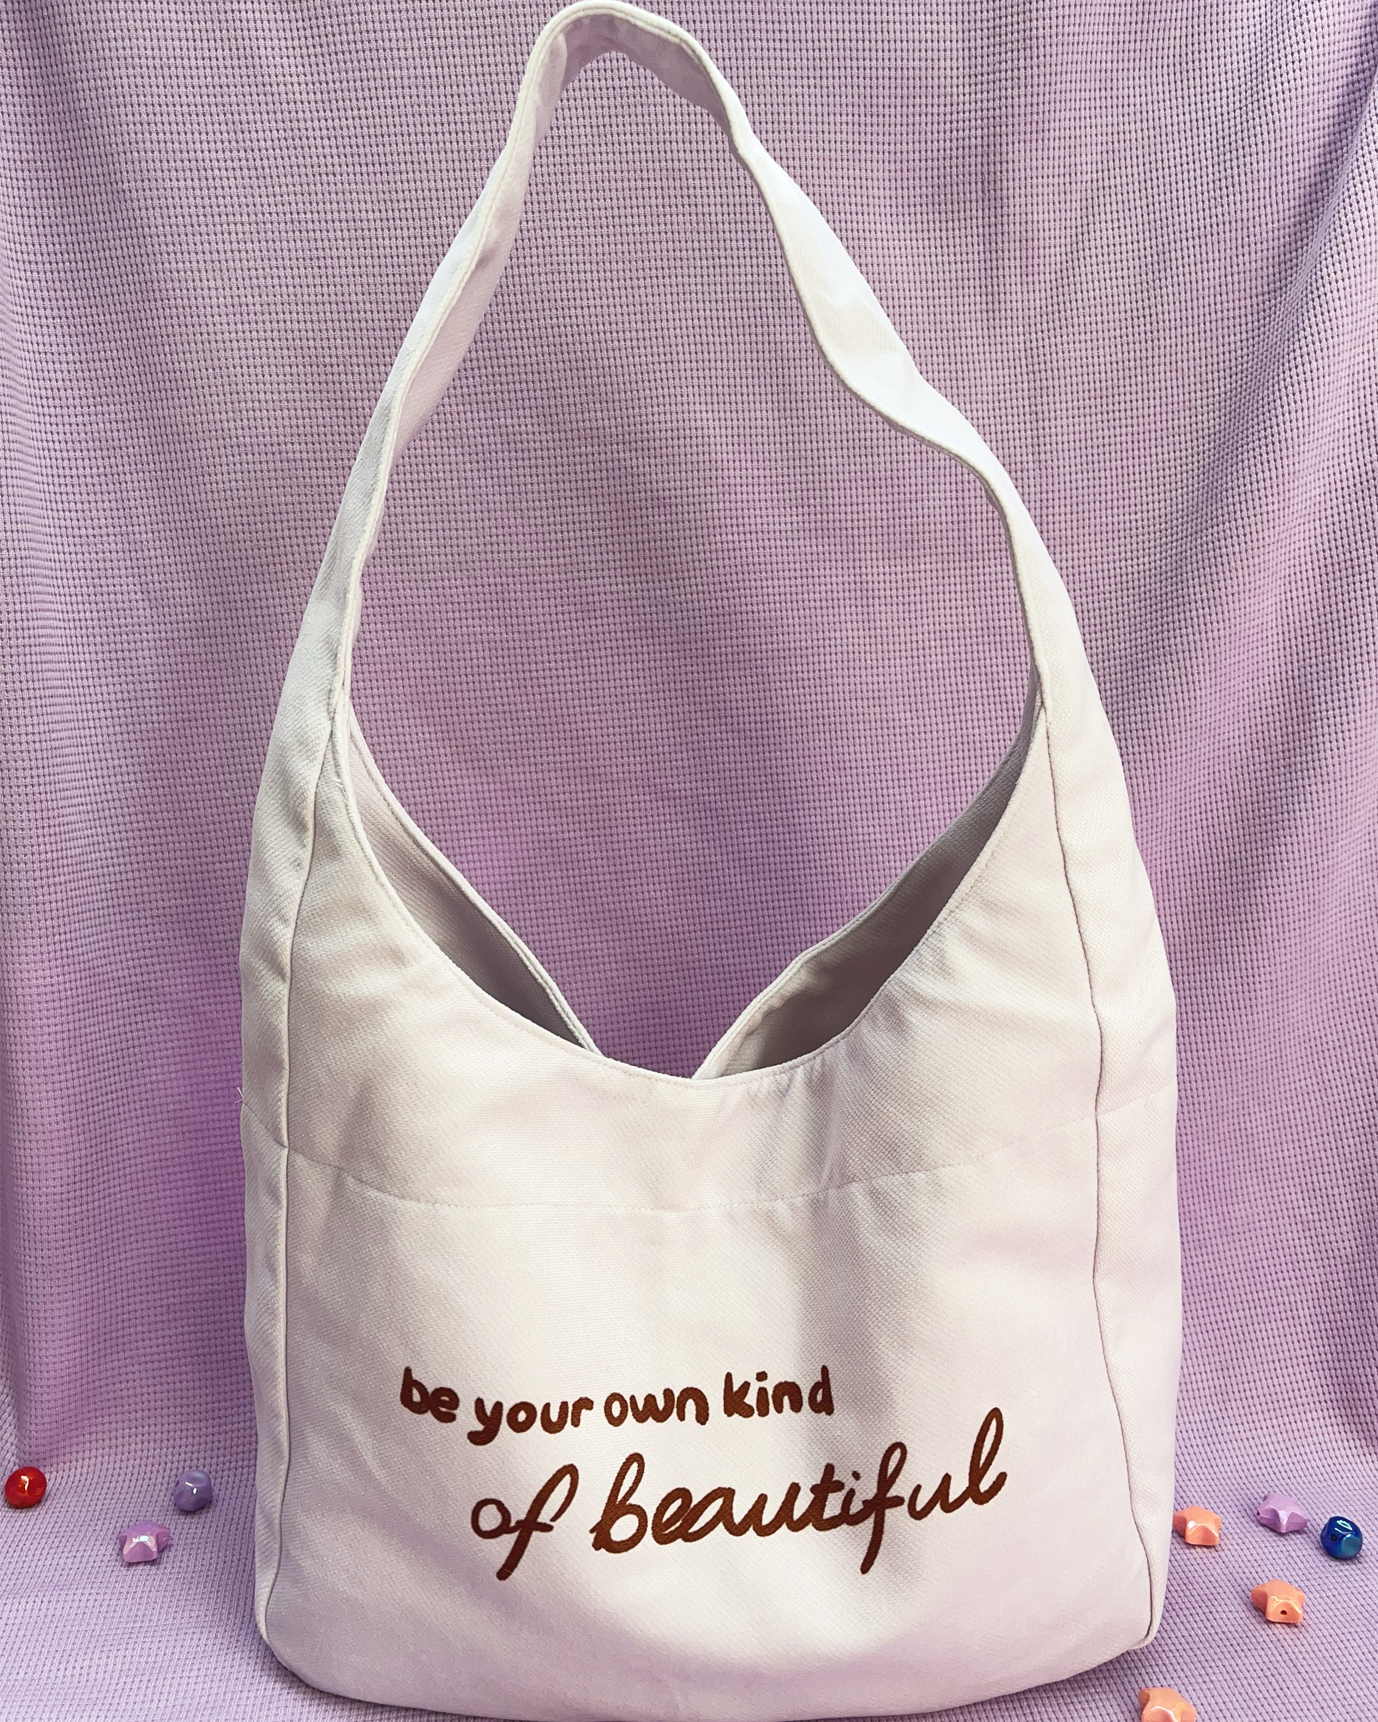 Be your own kind of Beautiful! - Lilac Large Shoulder Bag